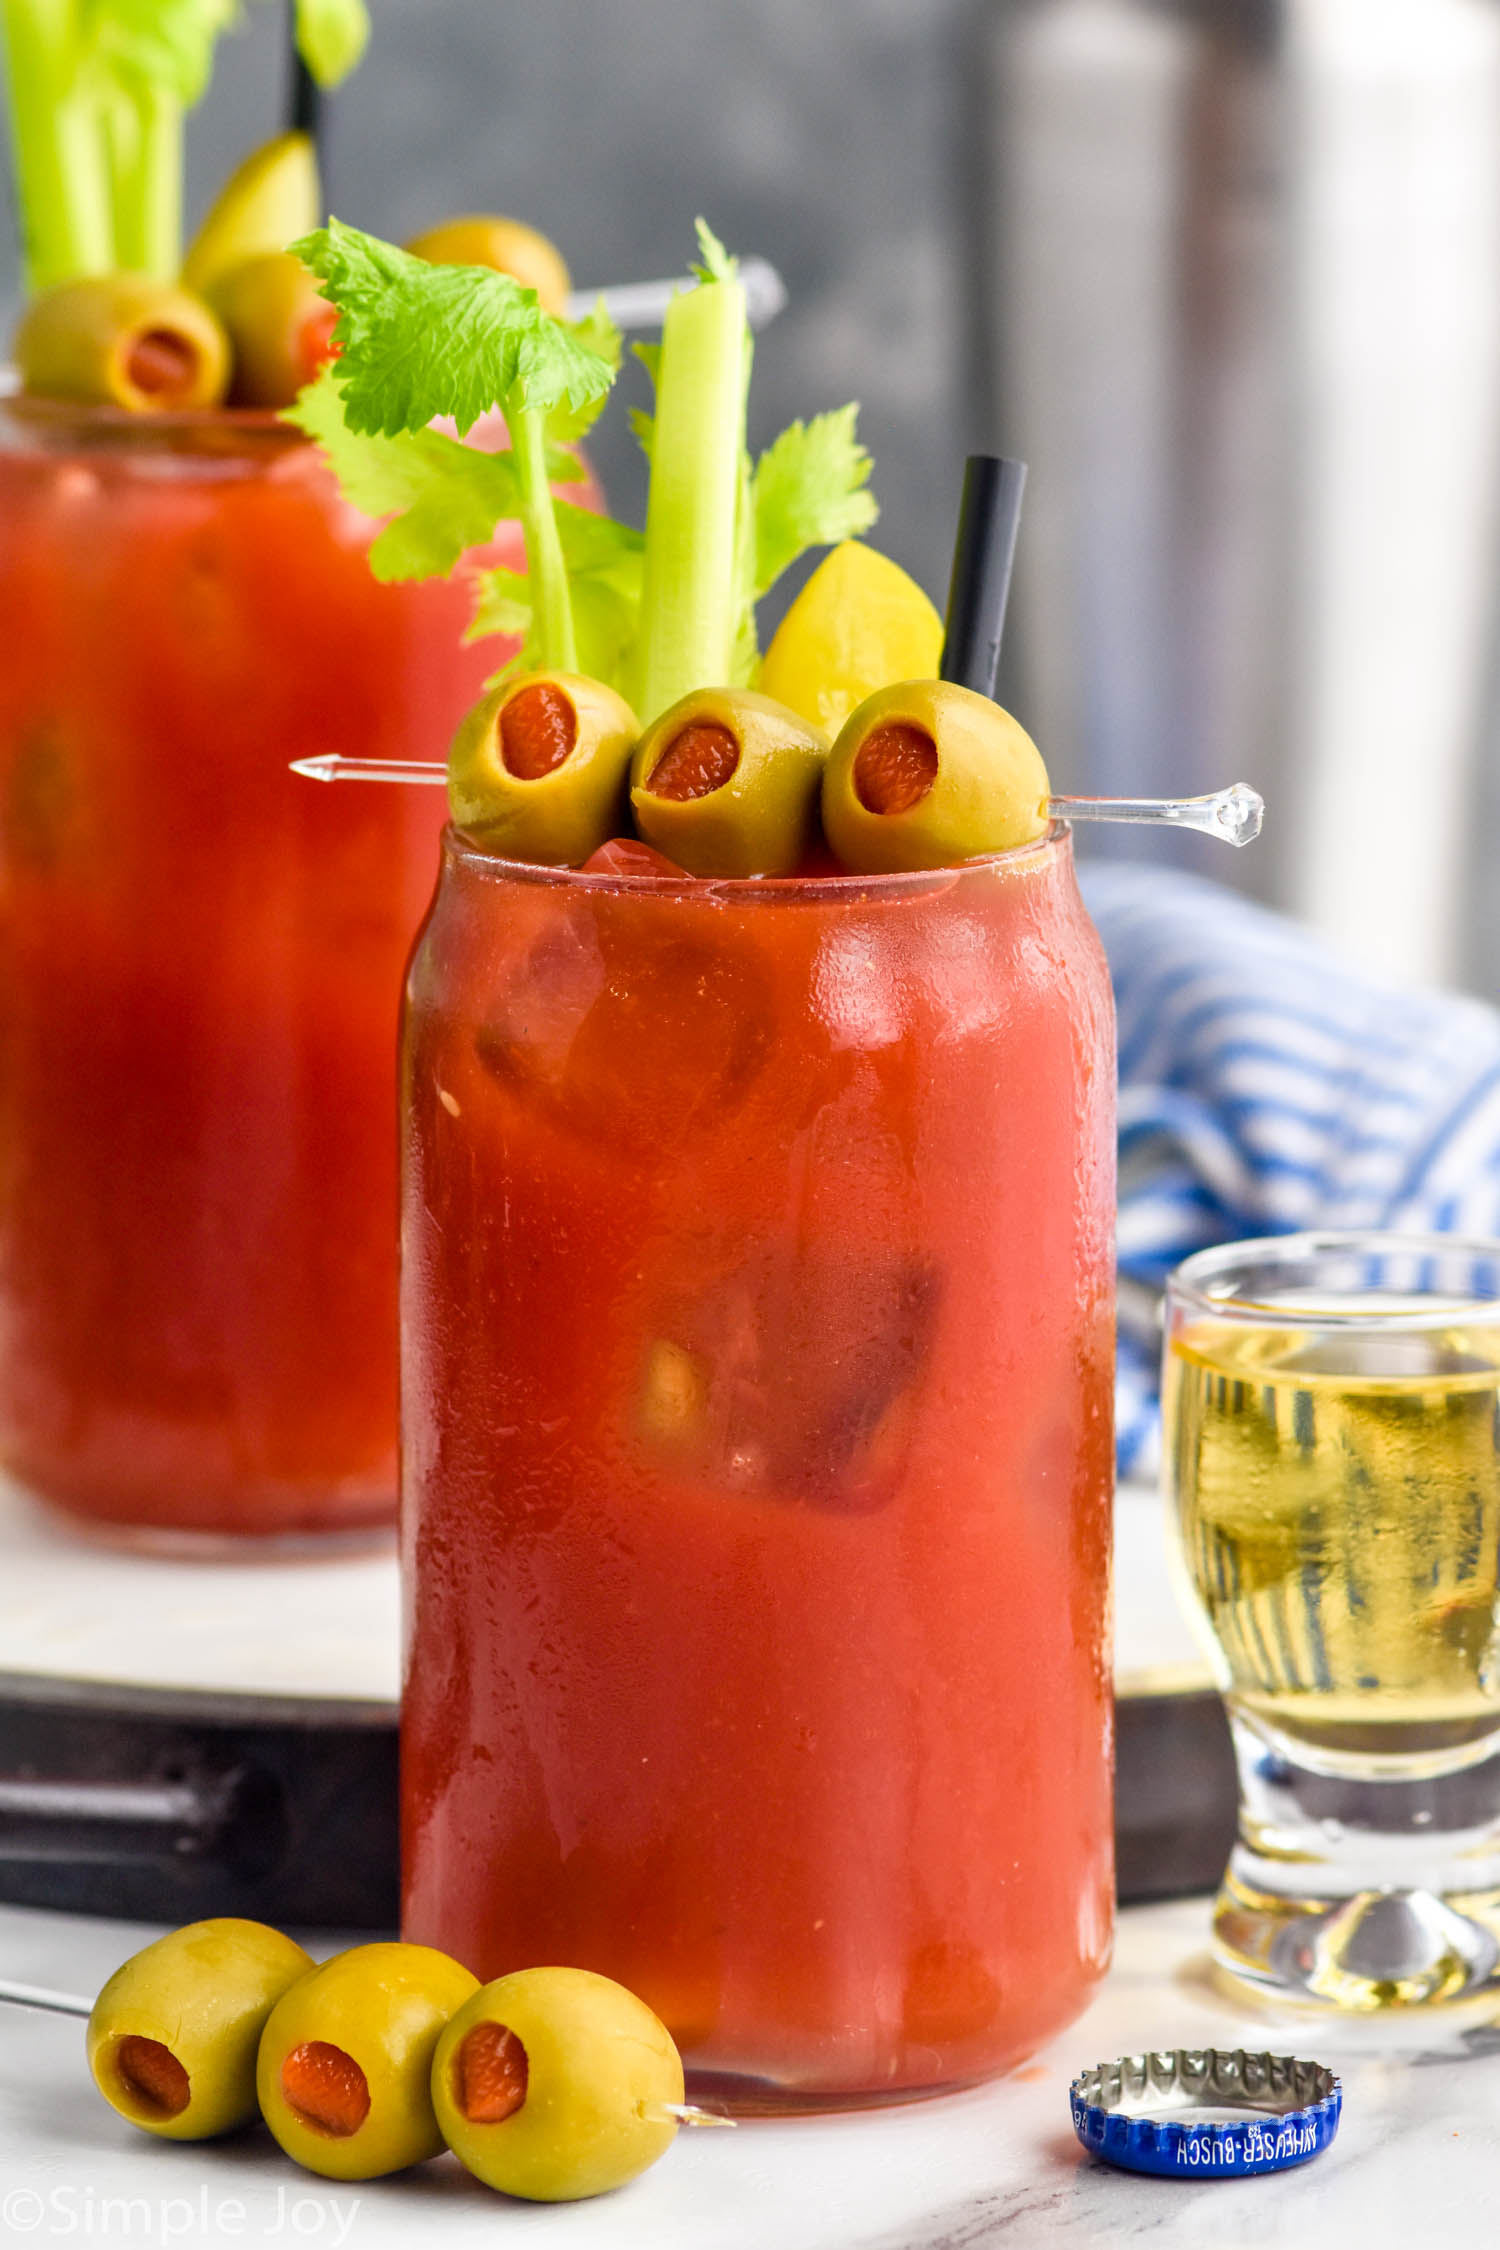 Best Bloody Mary Recipe to Make at Home - Garnish with Lemon